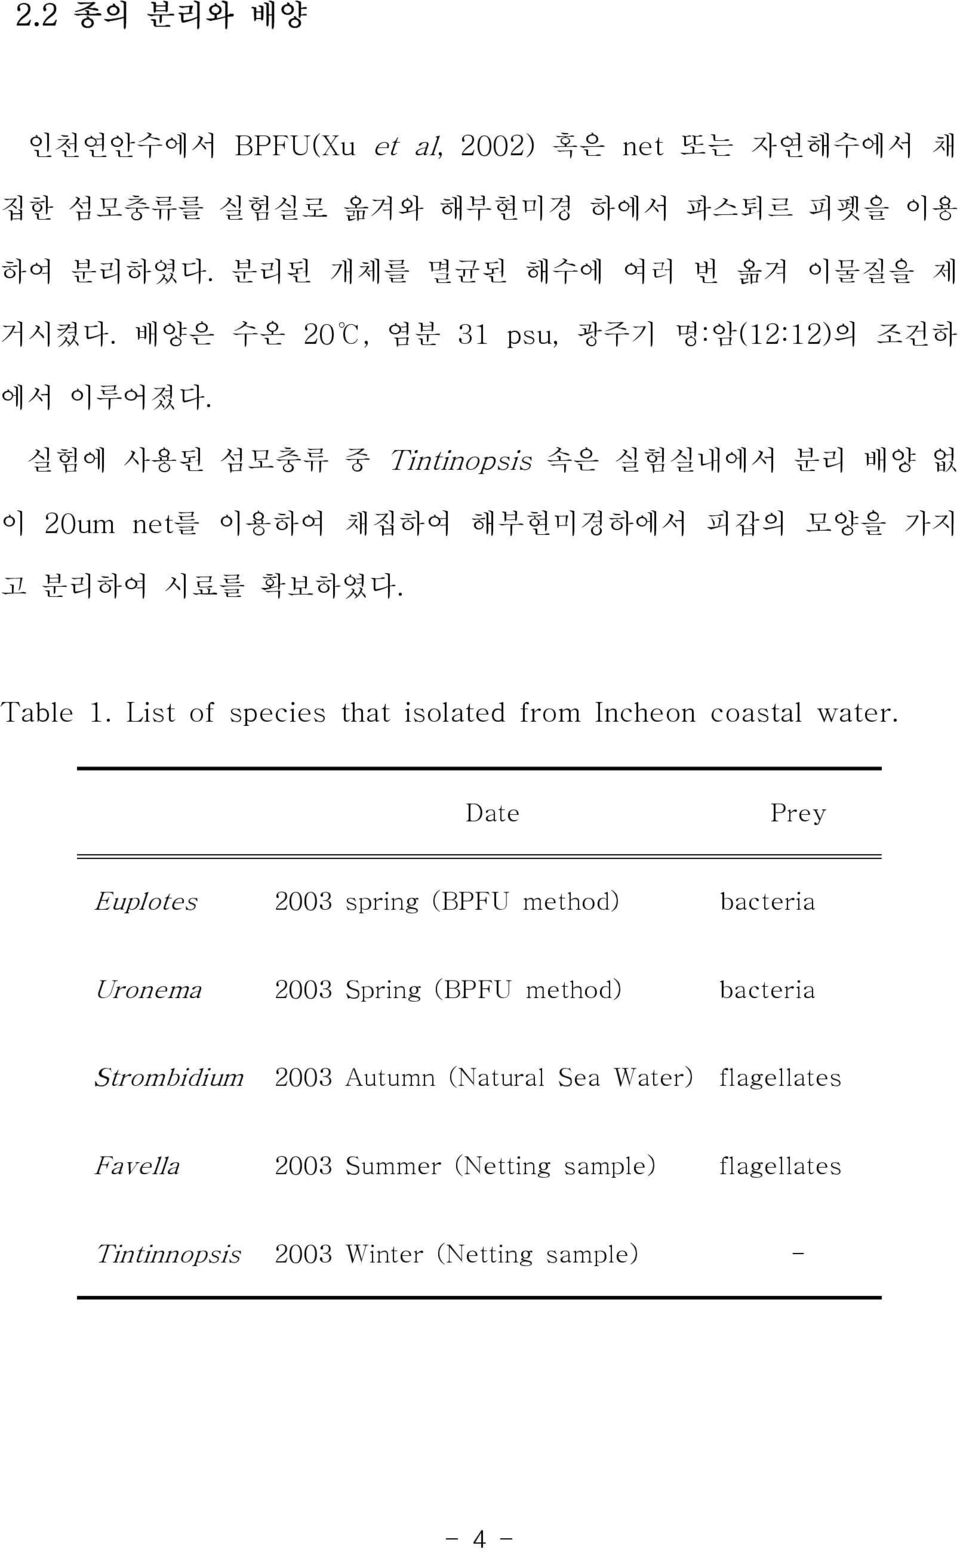 Table 1. List of species that isolated from Incheon coastal water.